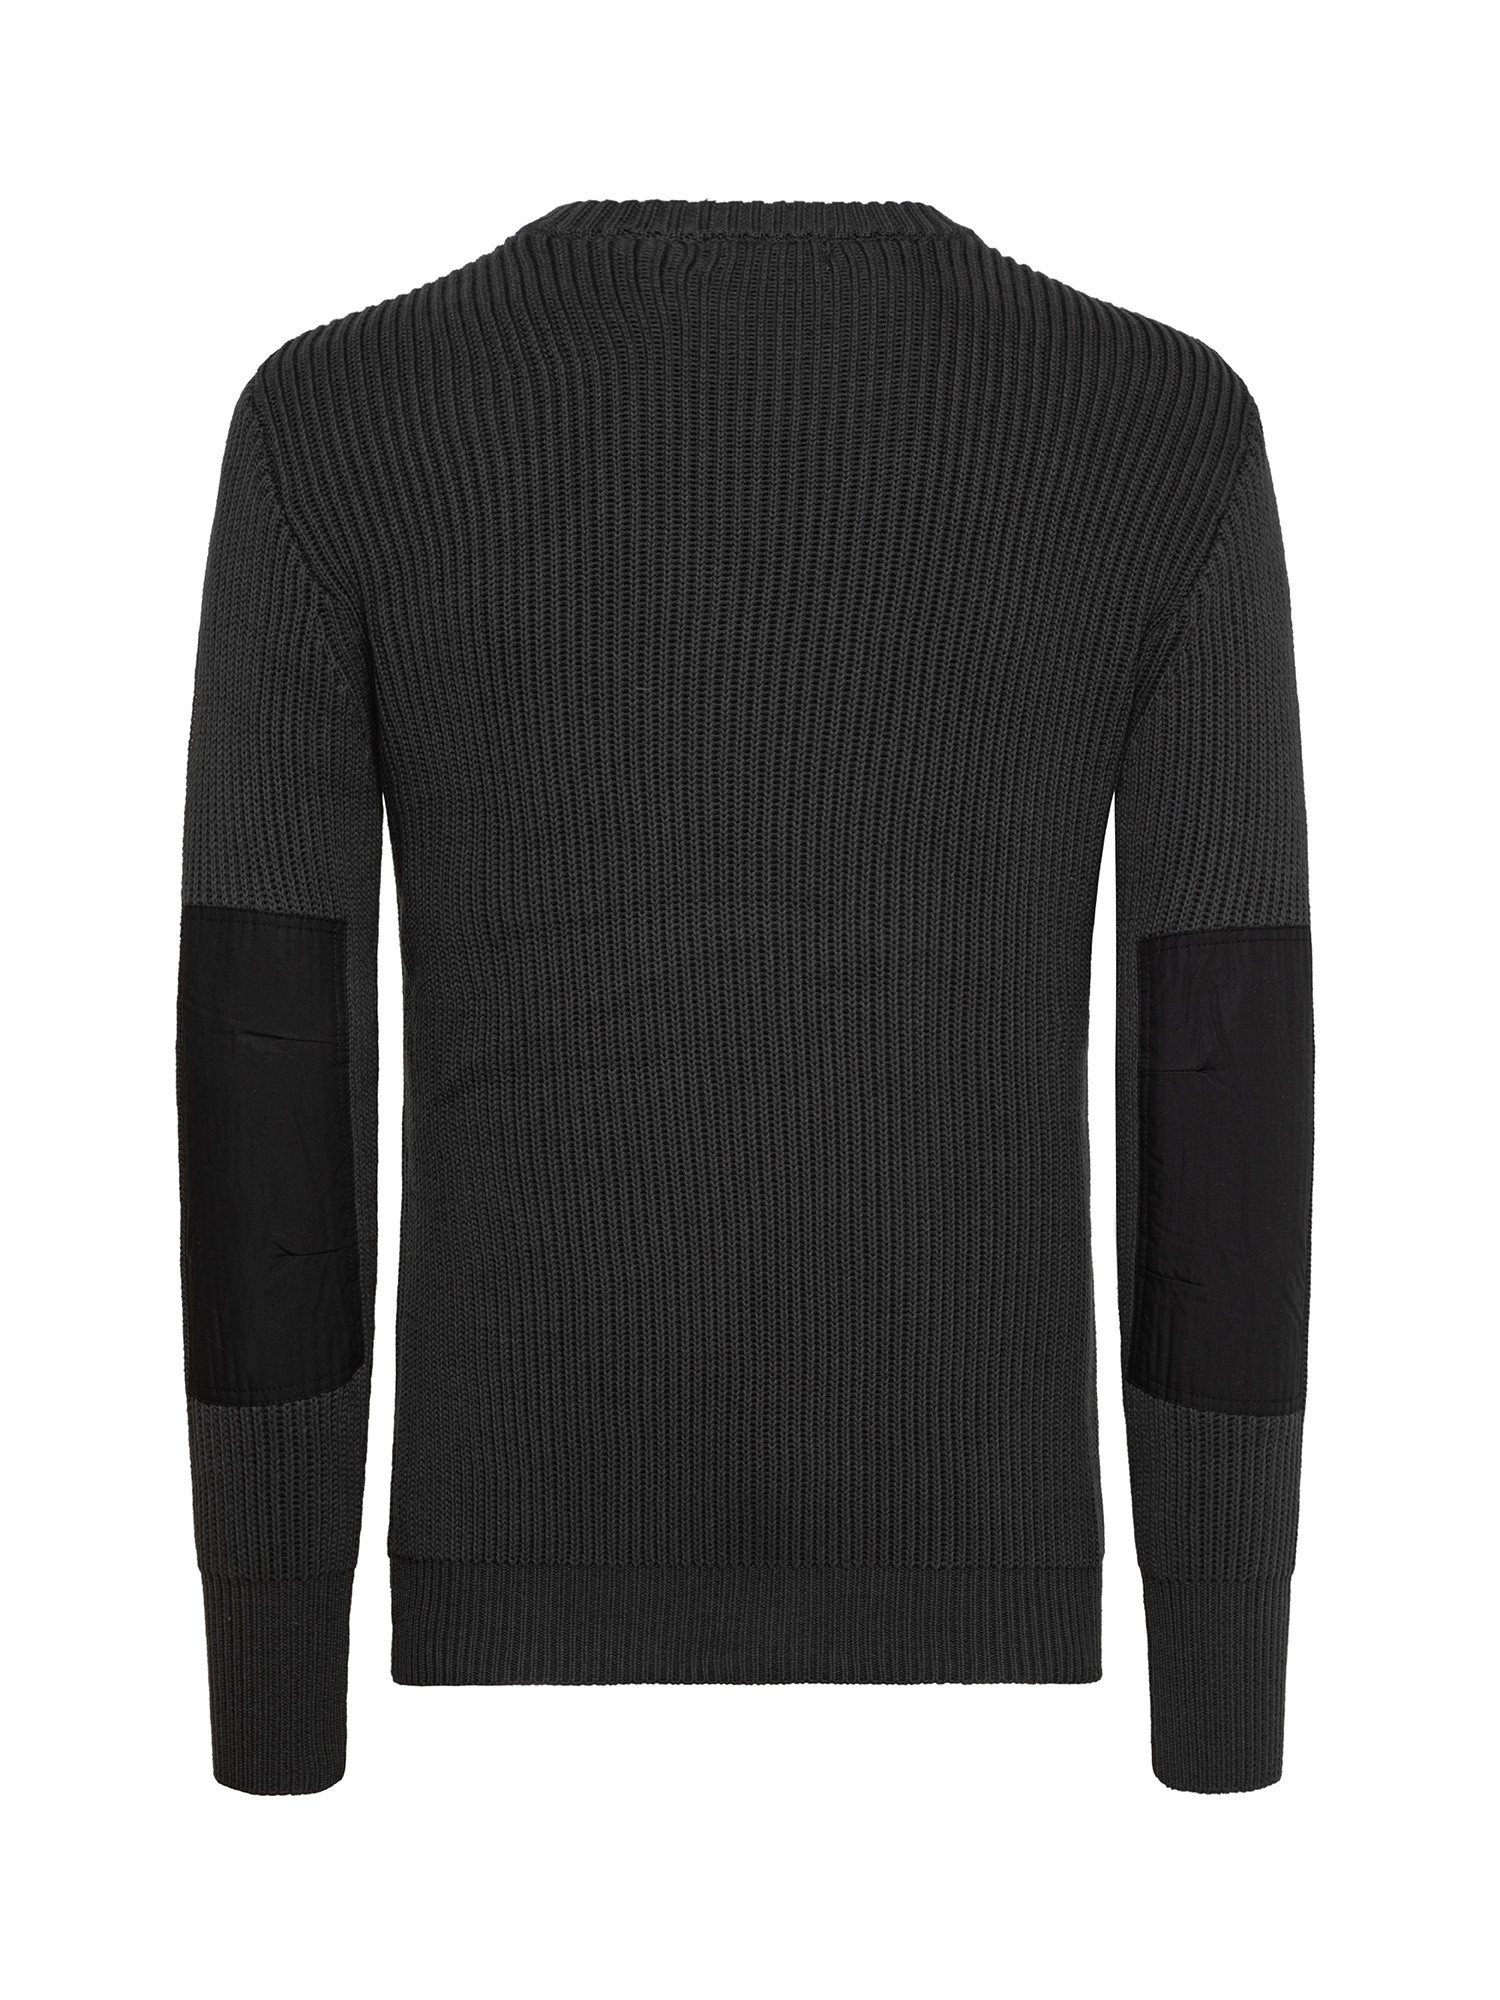 G-Star - Sweater with pocket, Anthracite, large image number 1